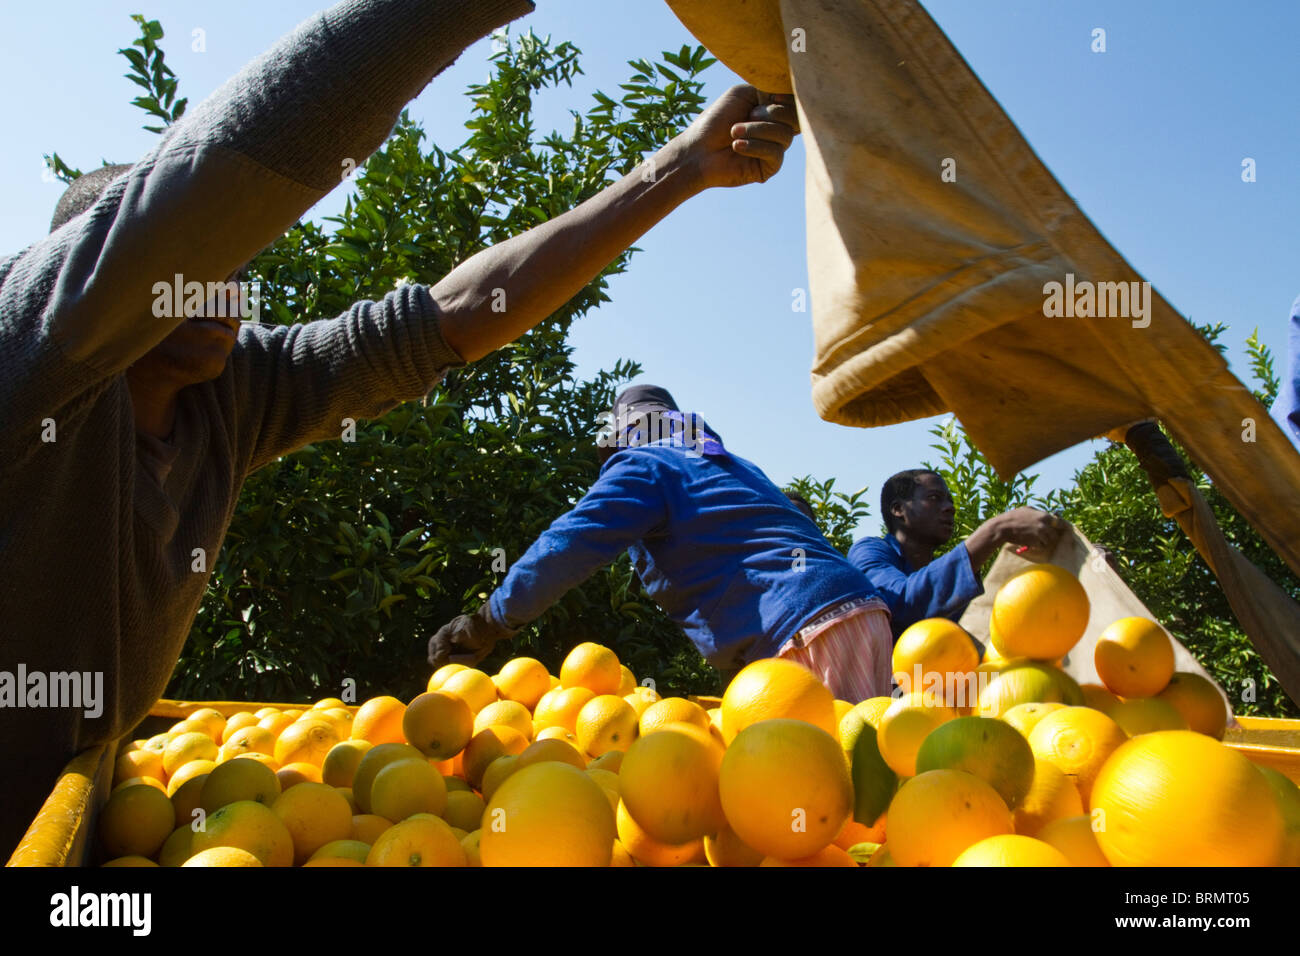 Worker emptying a bag of freshly harvested oranges into a trailer Stock Photo